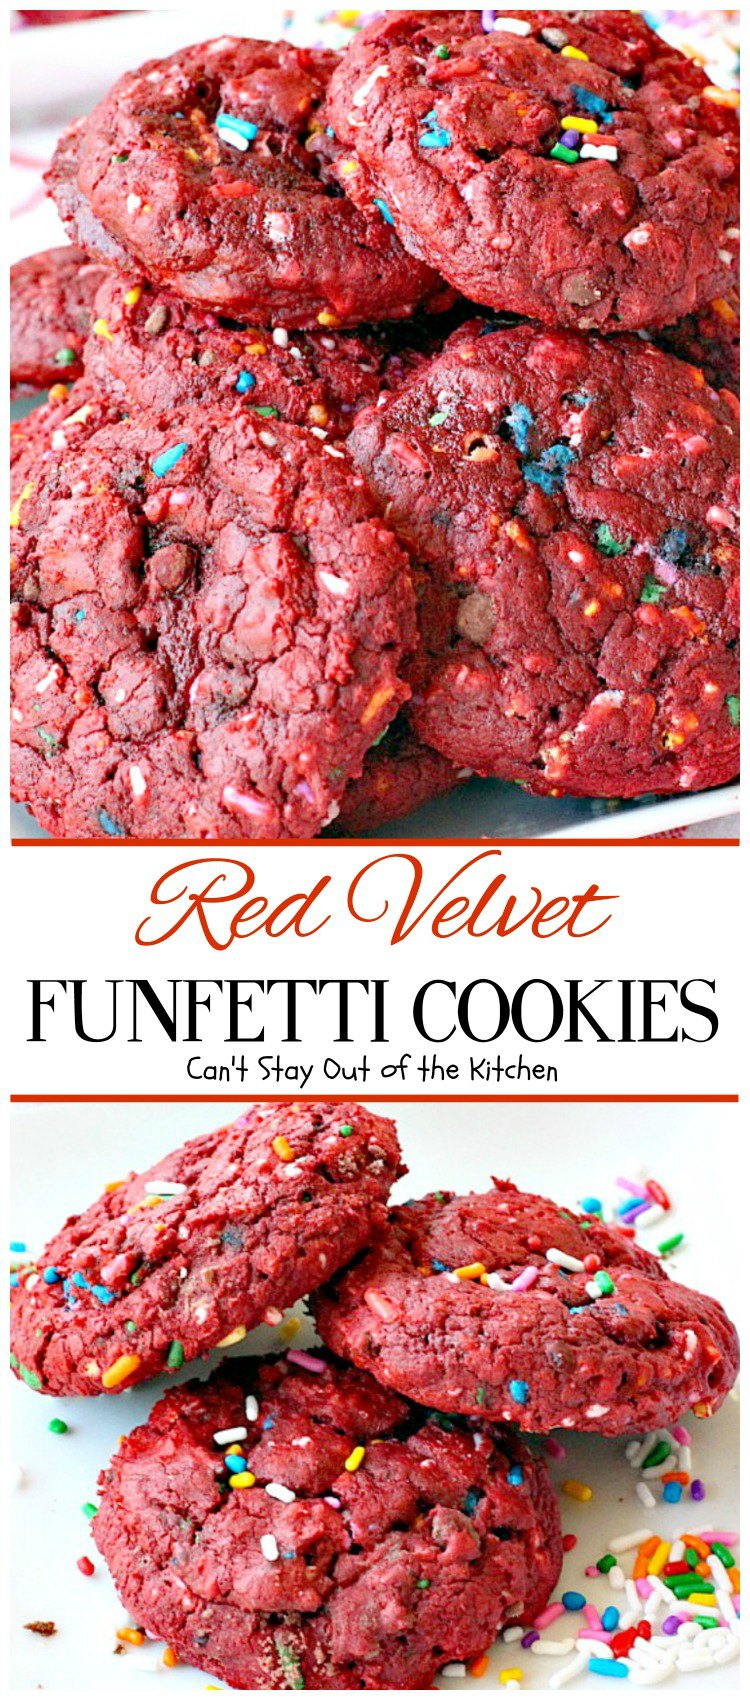 Red Velvet Funfetti Cookies | Can't Stay Out of the Kitchen